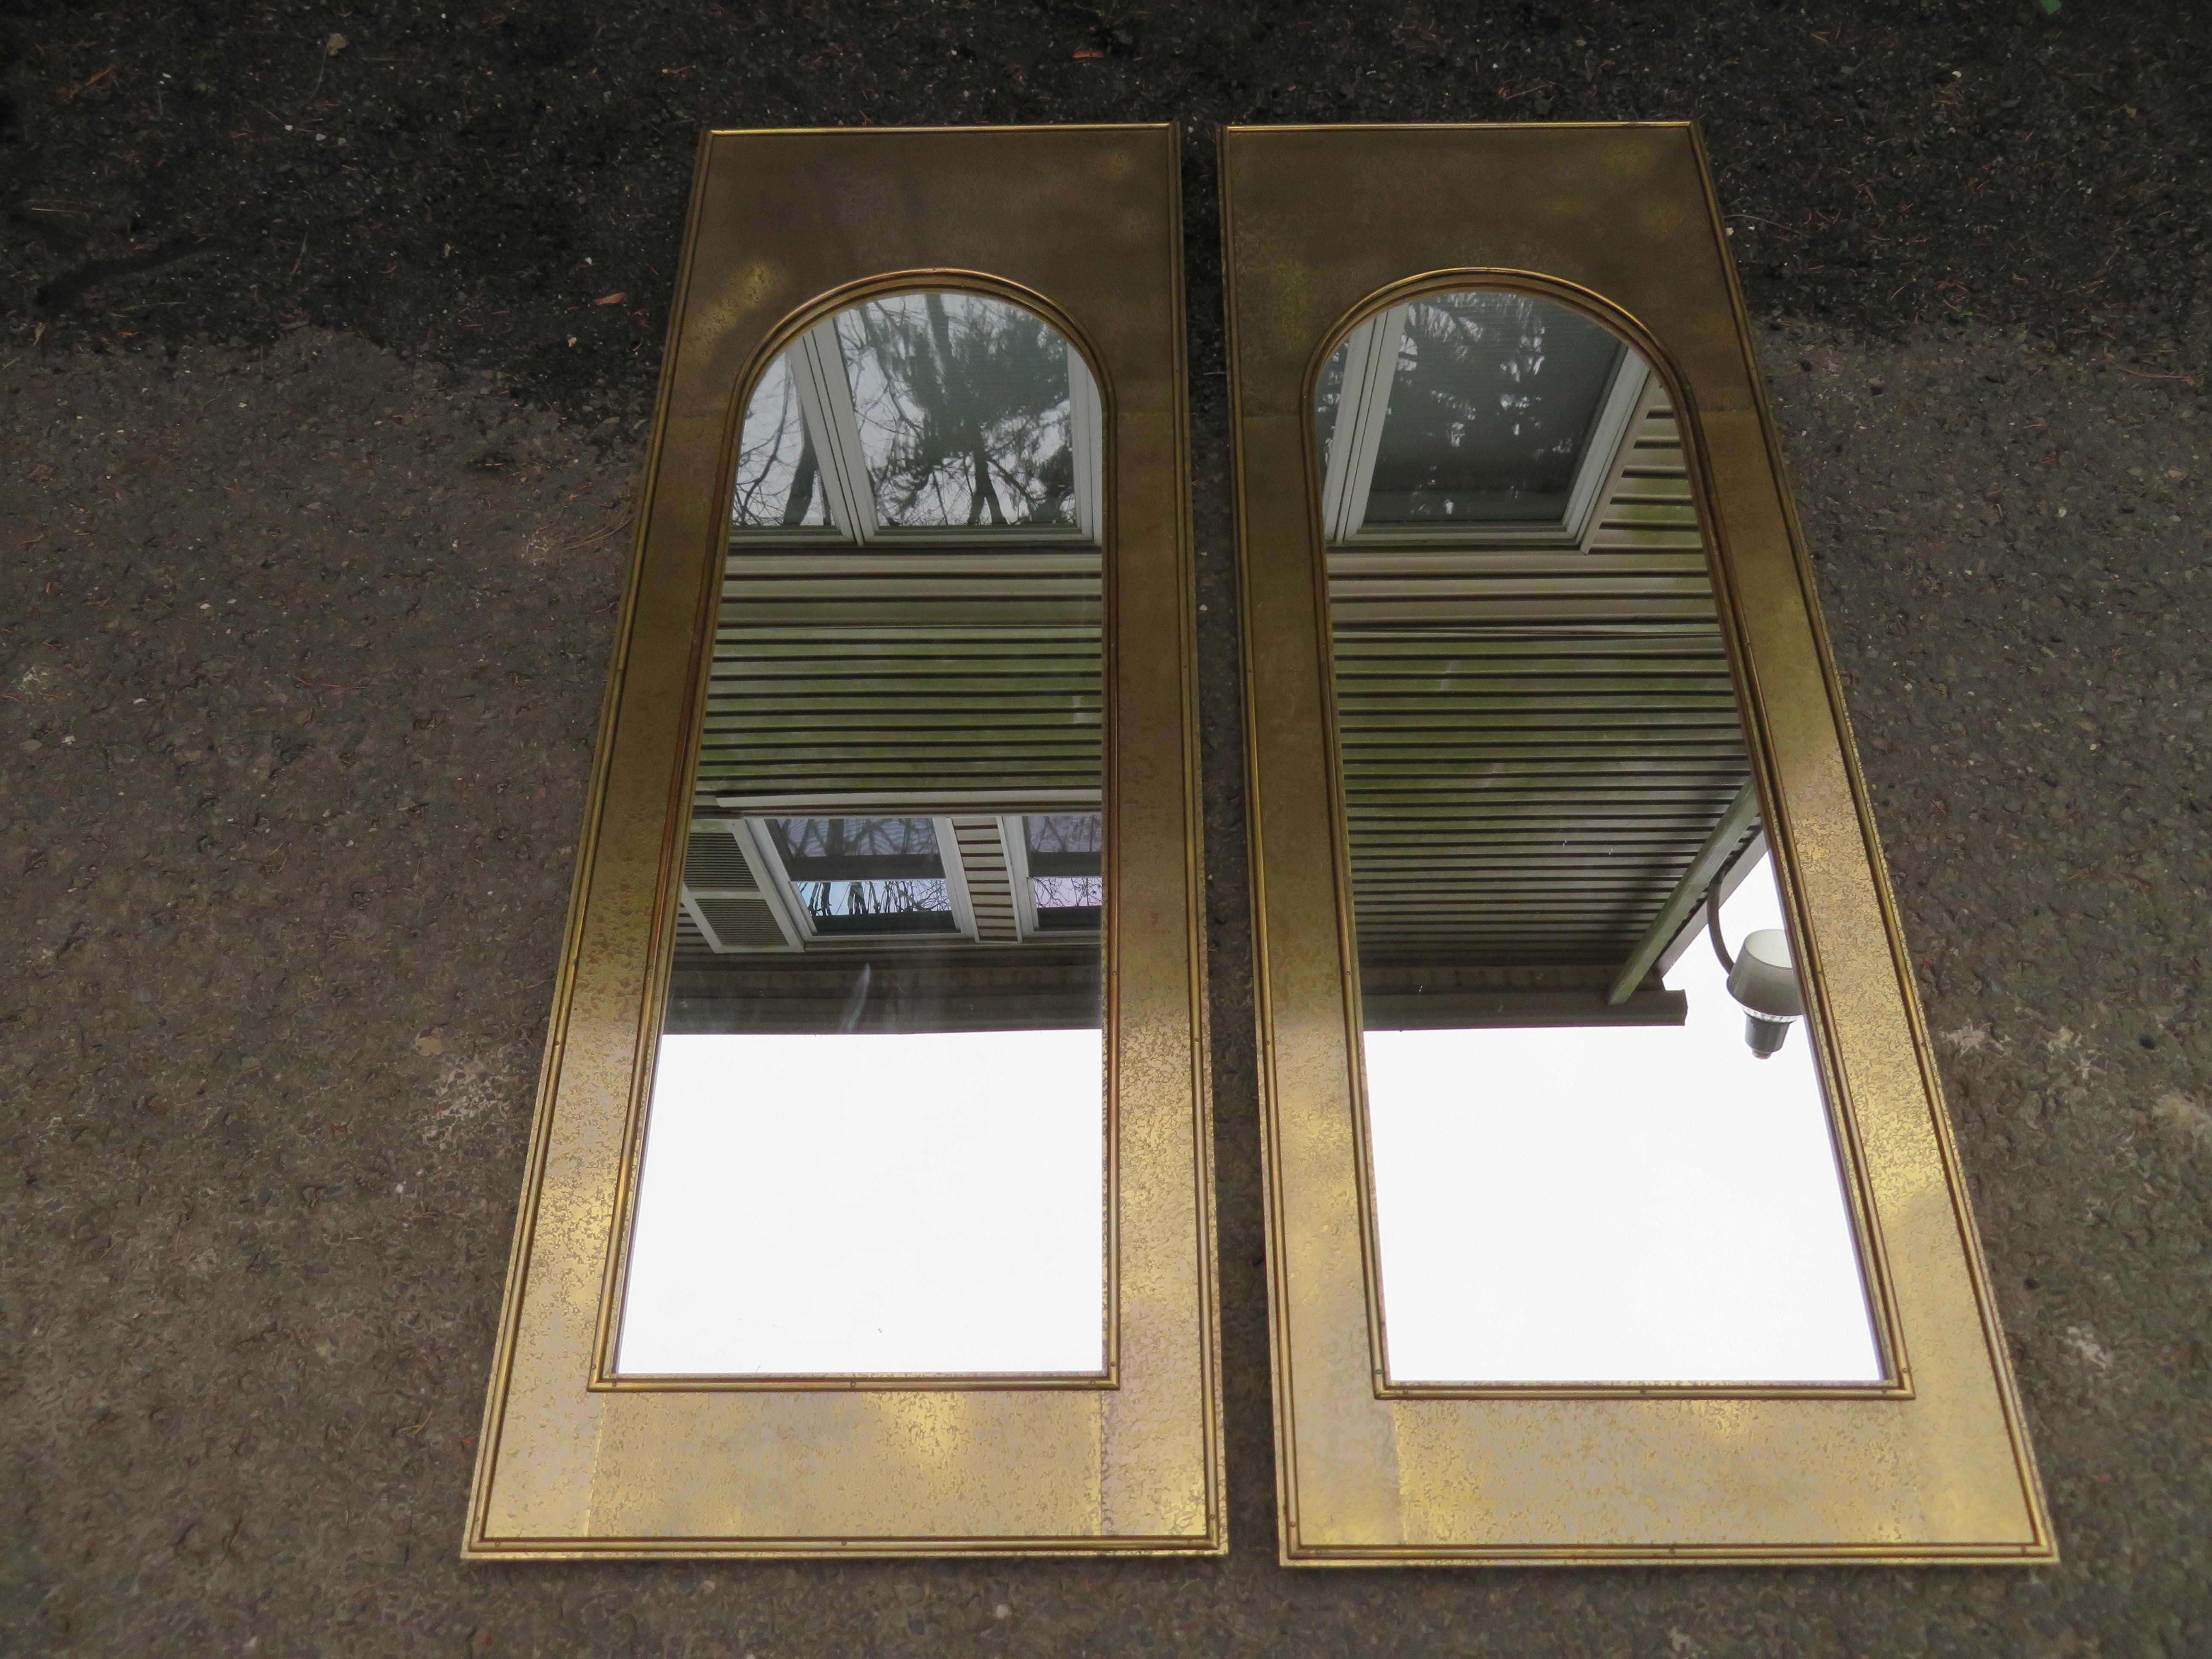 Magnificent pair of Mastercraft etched brass arched Palladian topped mirrors. These mirrors are in wonderful vintage condition and are very high quality made with old world craftsmanship. They measure 55